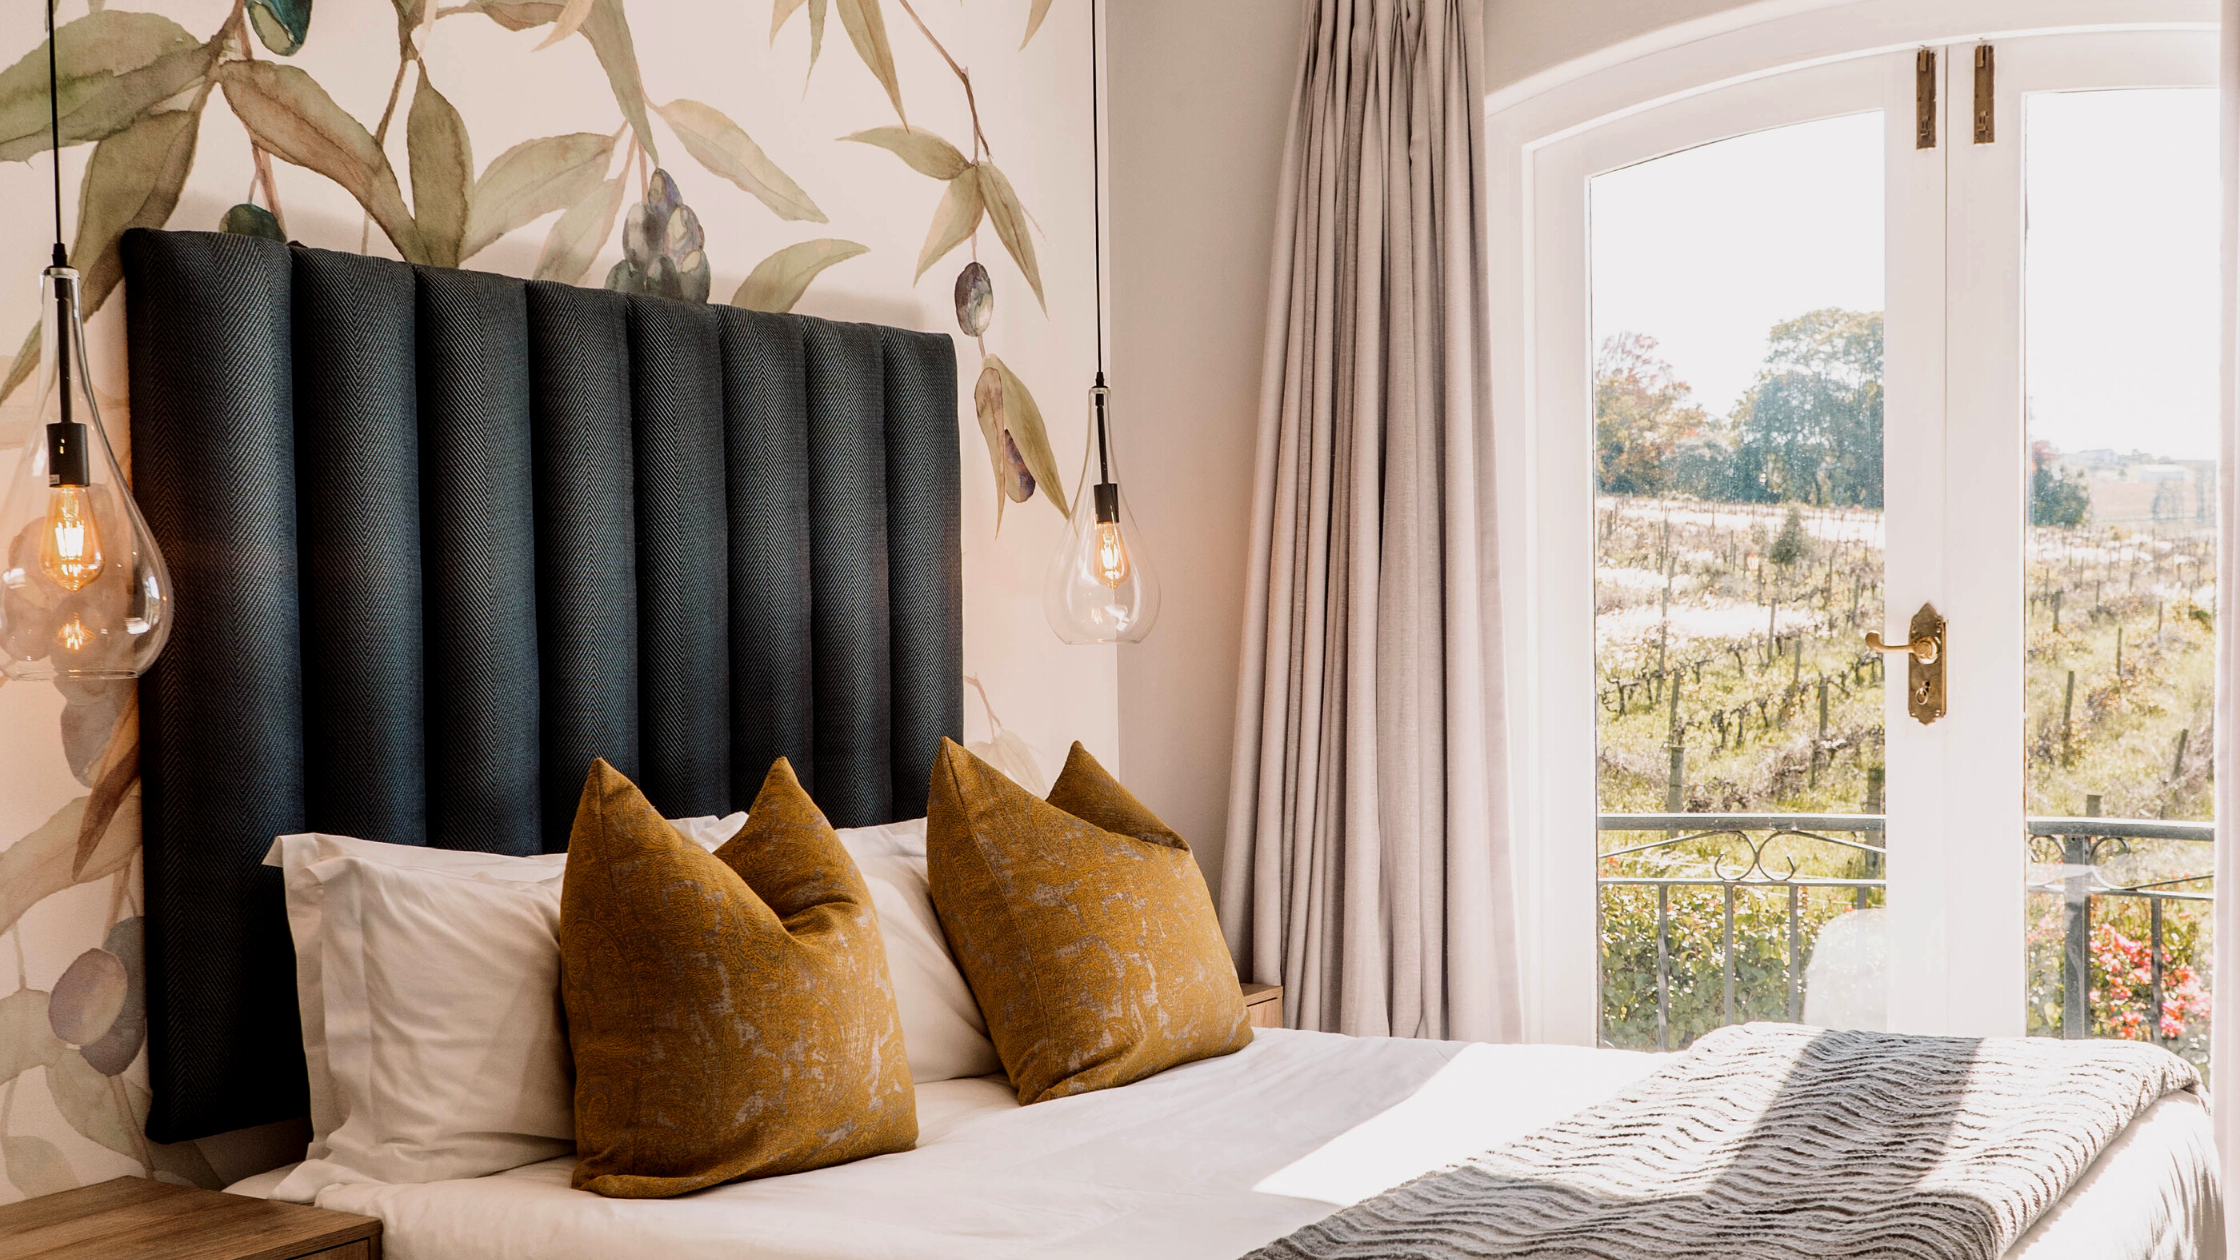 Image of a luxury suite at the Salene, a boutique hotel near Stellenbosch. Captured by Kyla Diamond Photography